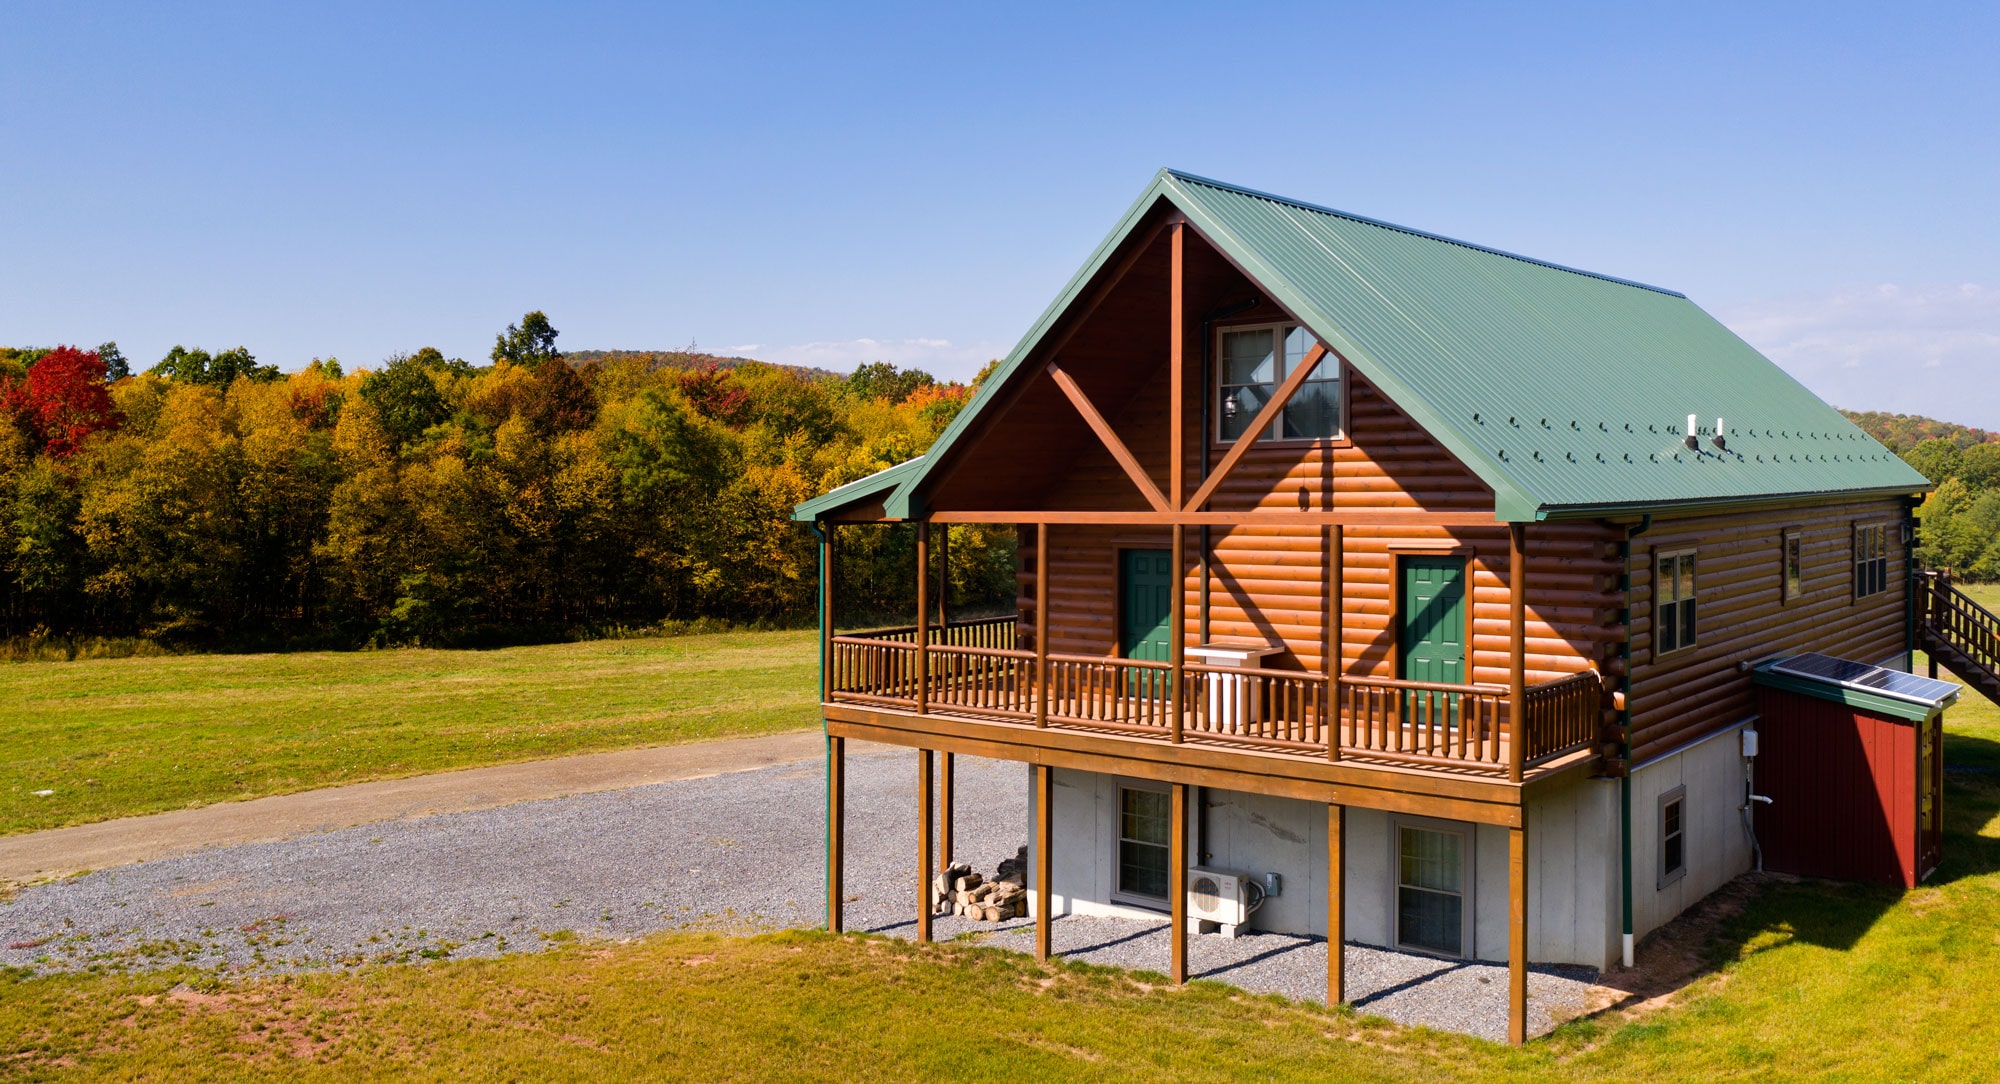 Know Before You Buy: FAQs About Amish Log Cabin Homes